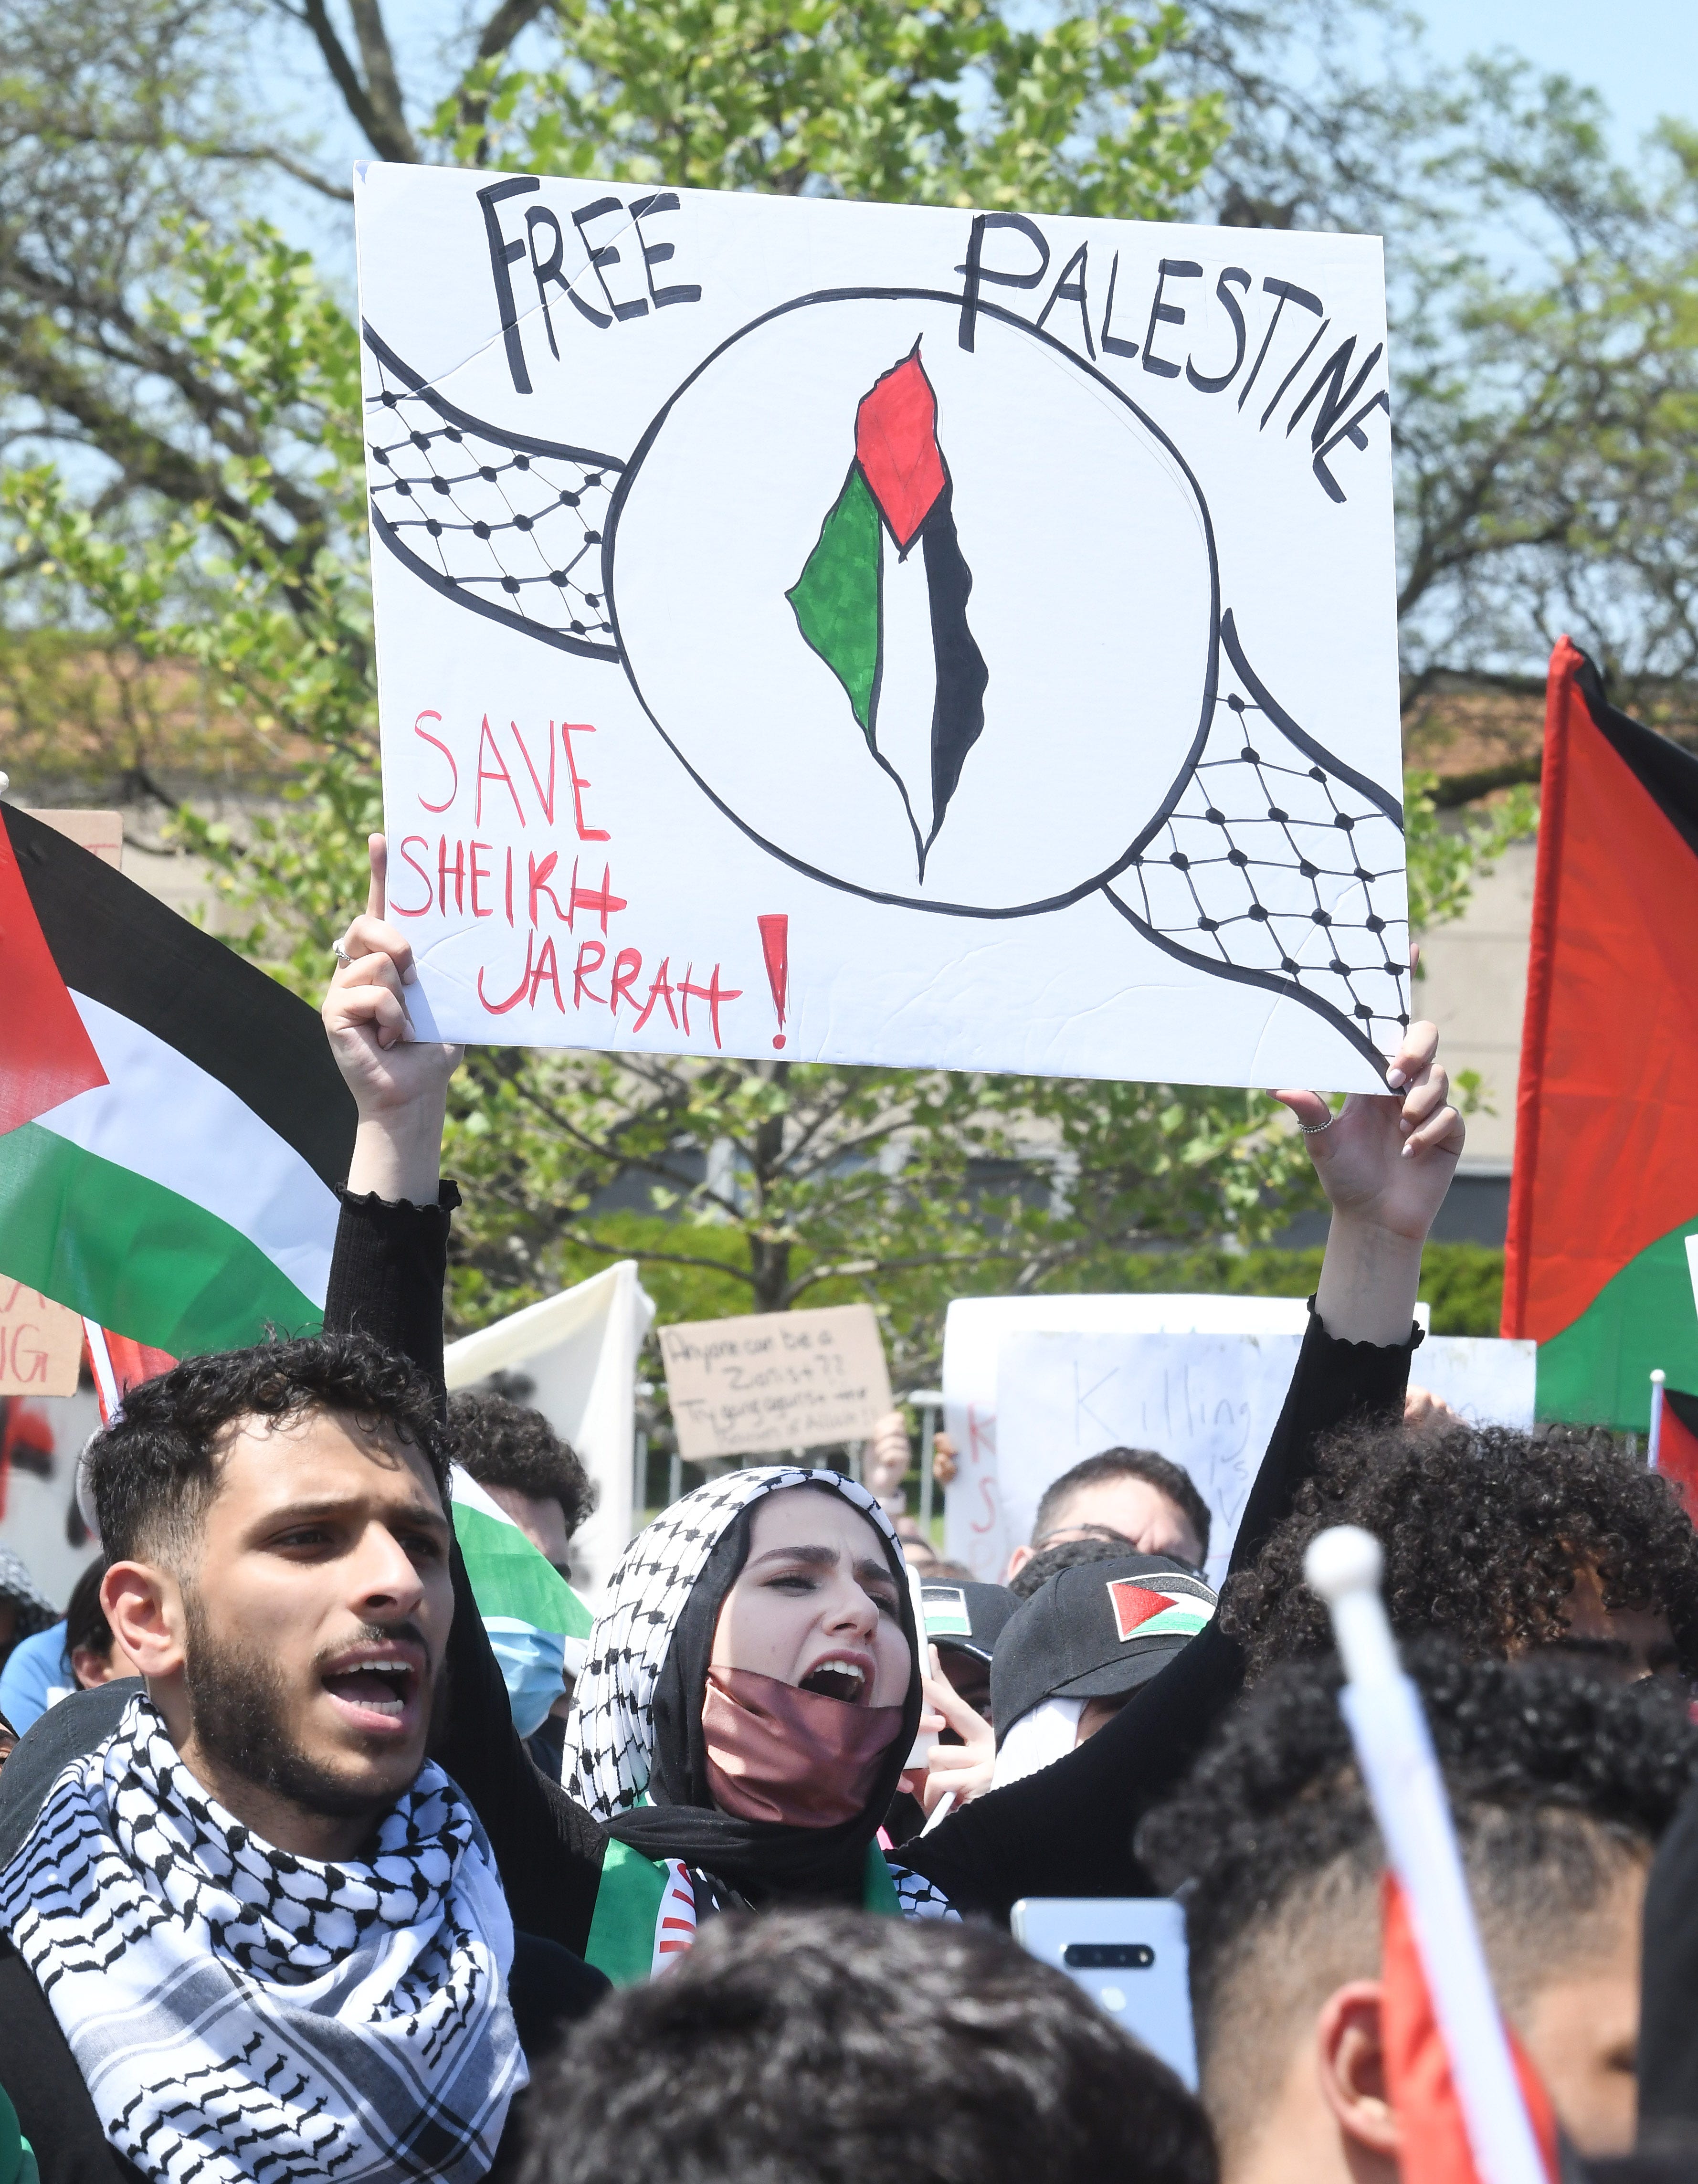 Thousands of Palestinian supporters listen to speakers during Palestinian protest and march, at the same time President Joe Biden is visiting in another part of Dearborn, Michigan on May 18, 2021.